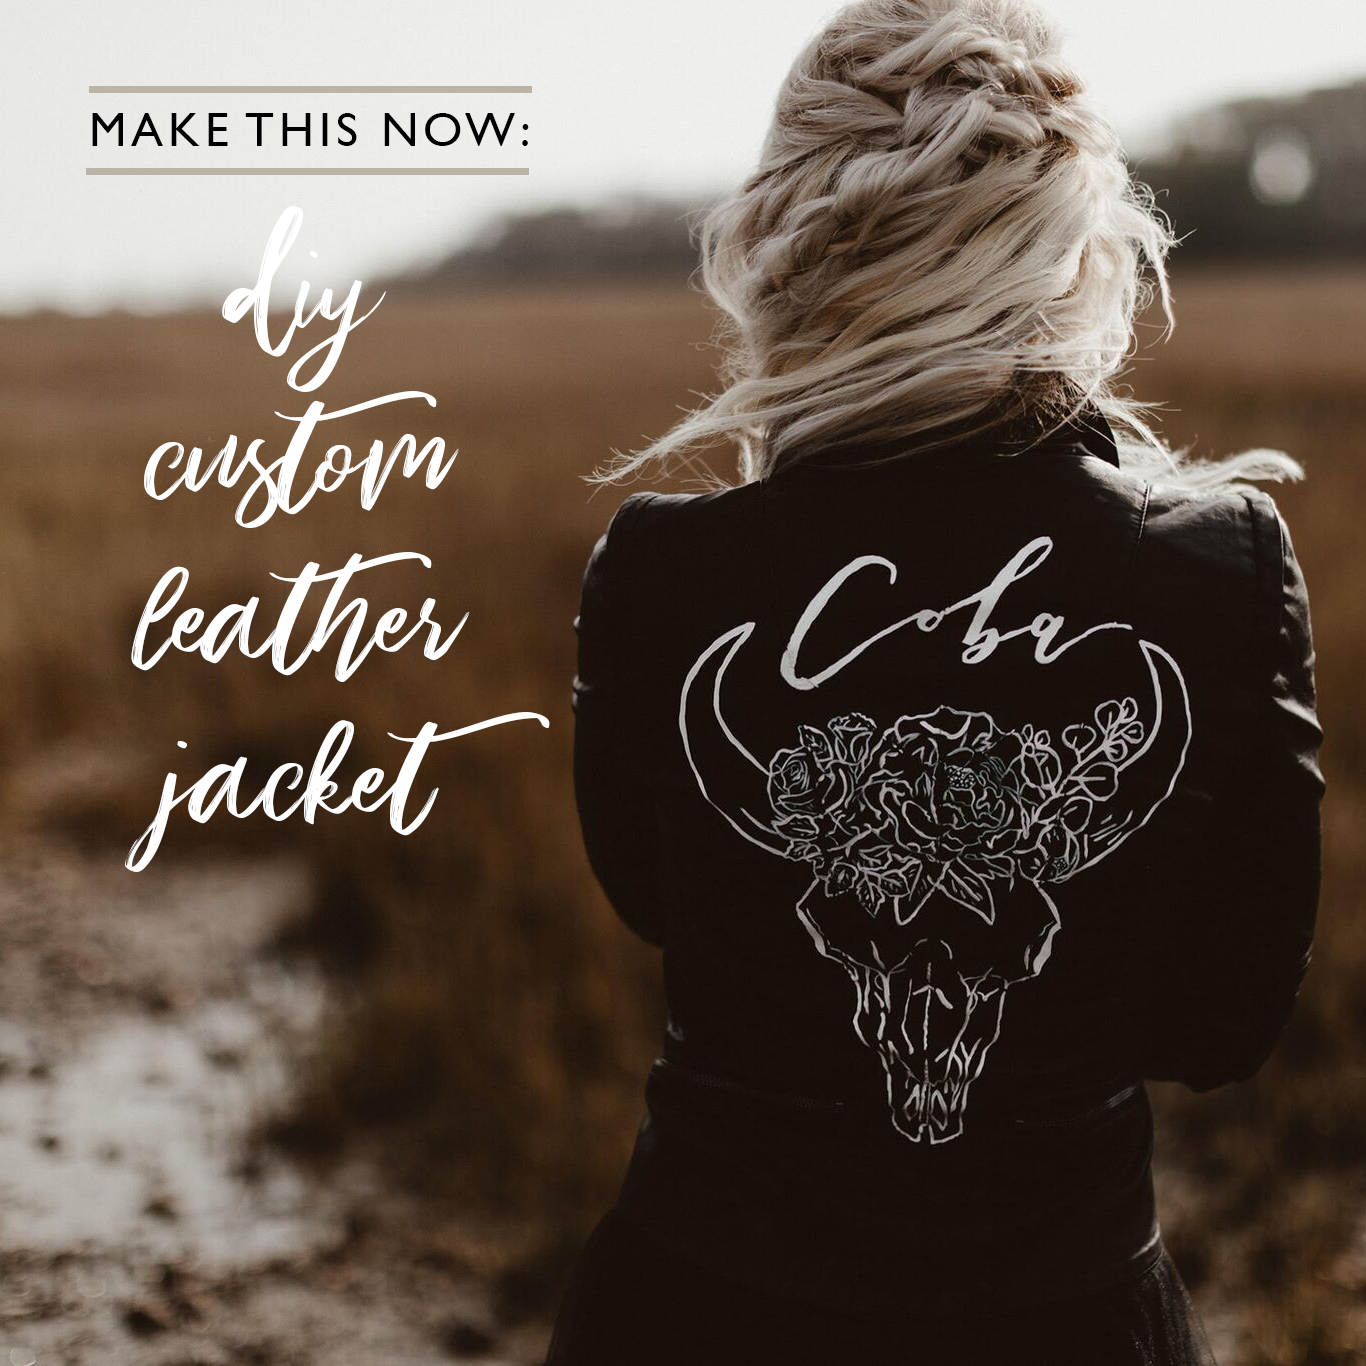 How to DIY a Custom Leather Jacket (It?s easier than you think!)